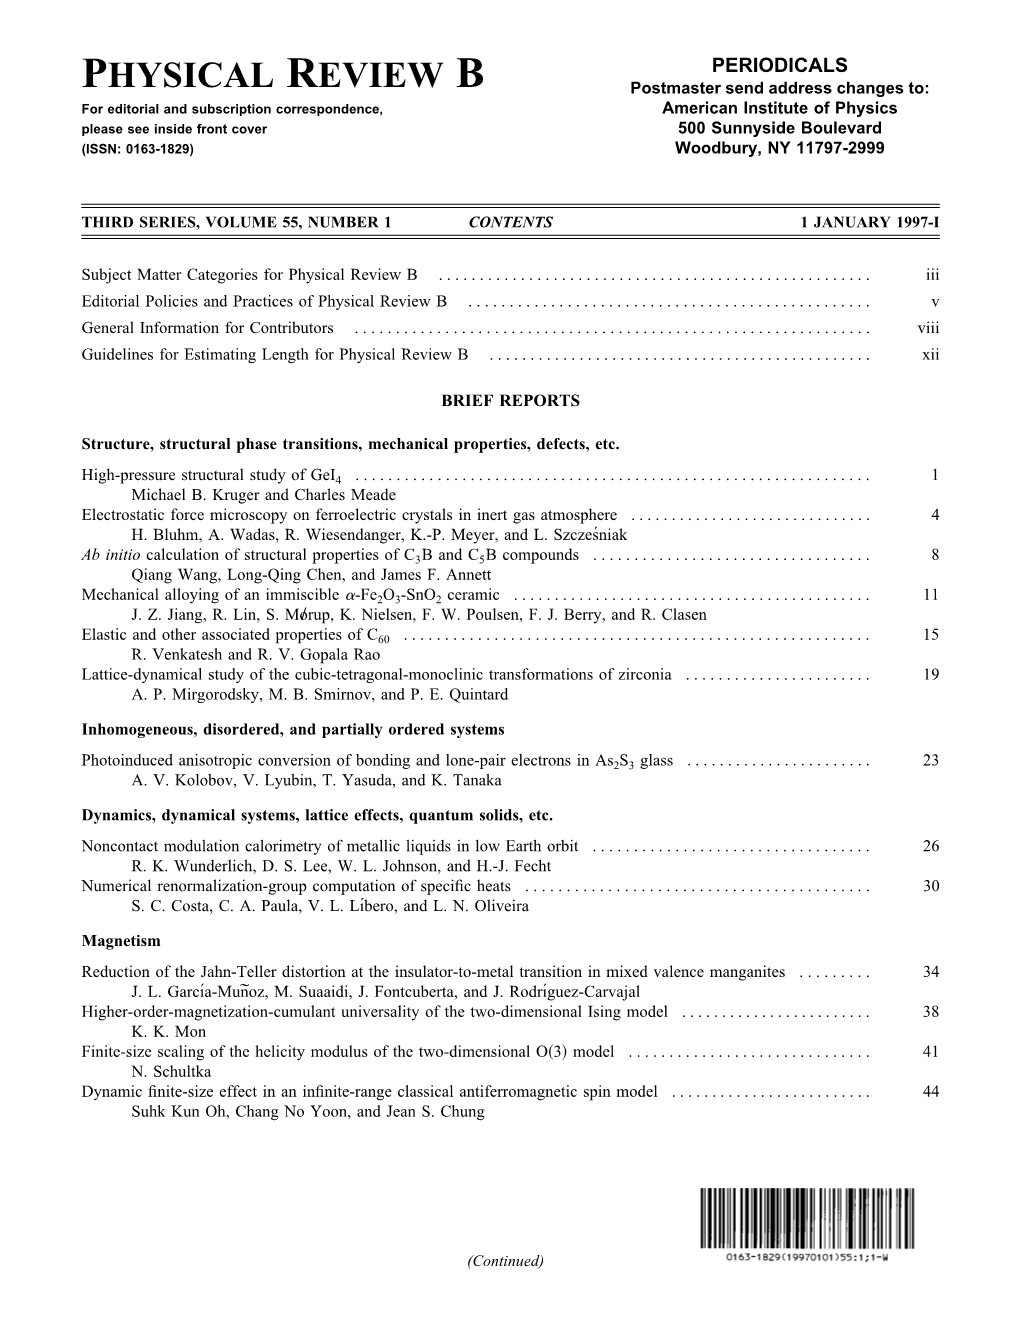 Table of Contents (Online)